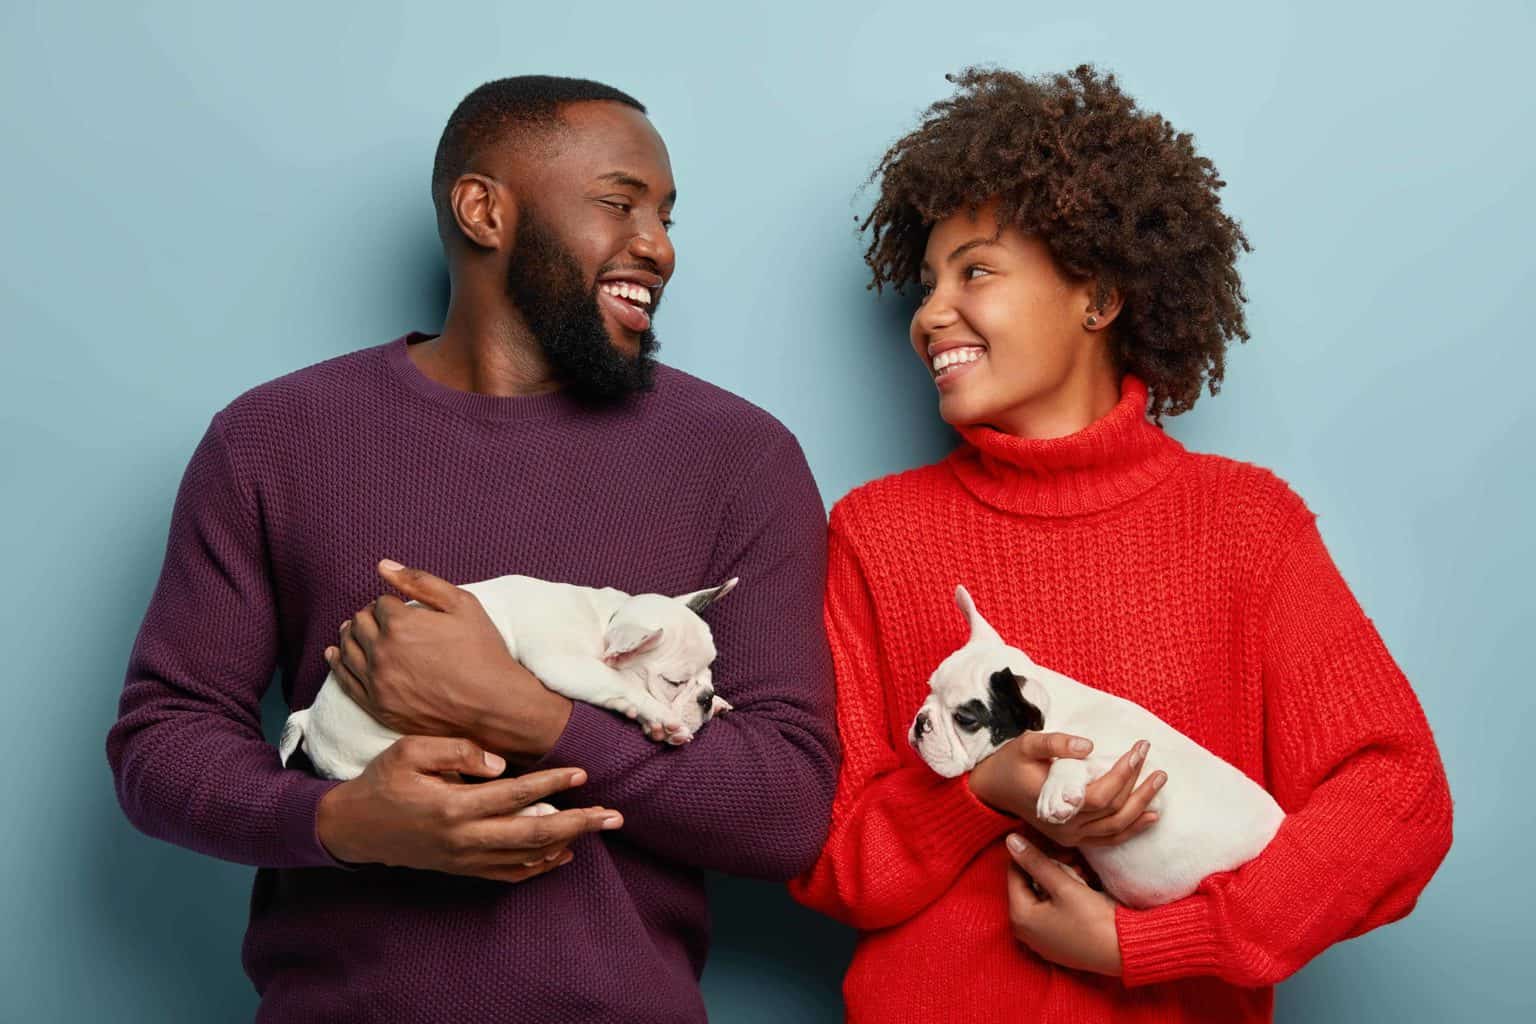 Loving couple gazes at each other while holding French Bulldog puppies. The best how we met stories include dogs that bring together dog lovers for their own happily ever after.